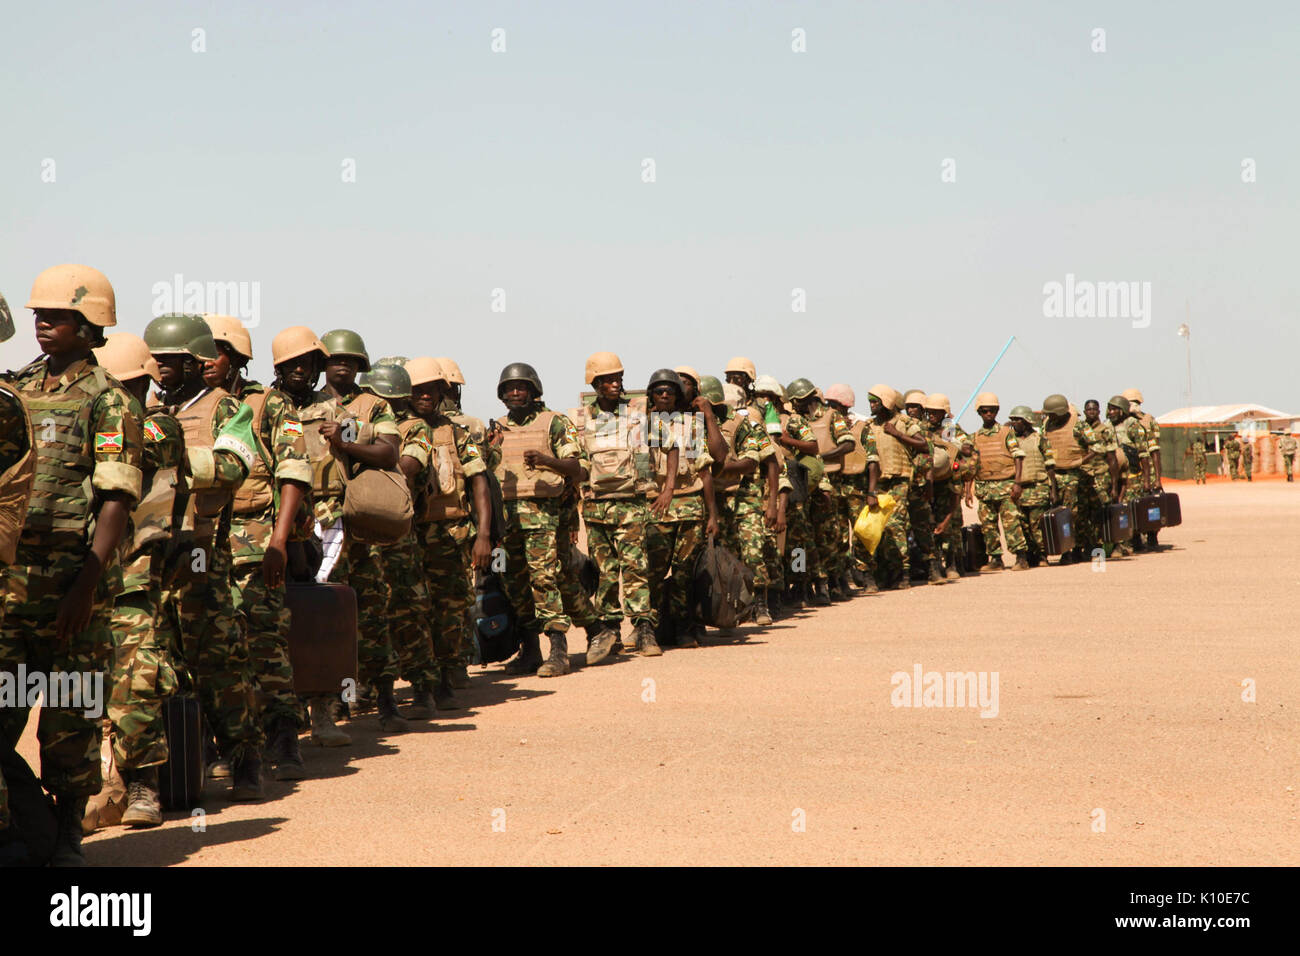 Amisom Burundian 80 contingent of troops depart from Kismayo International Airport for rotation, after serving more than one year in Kismayo, Somalia. On November 17, 2014 AUUN IST Photo (15631676319) Stock Photo